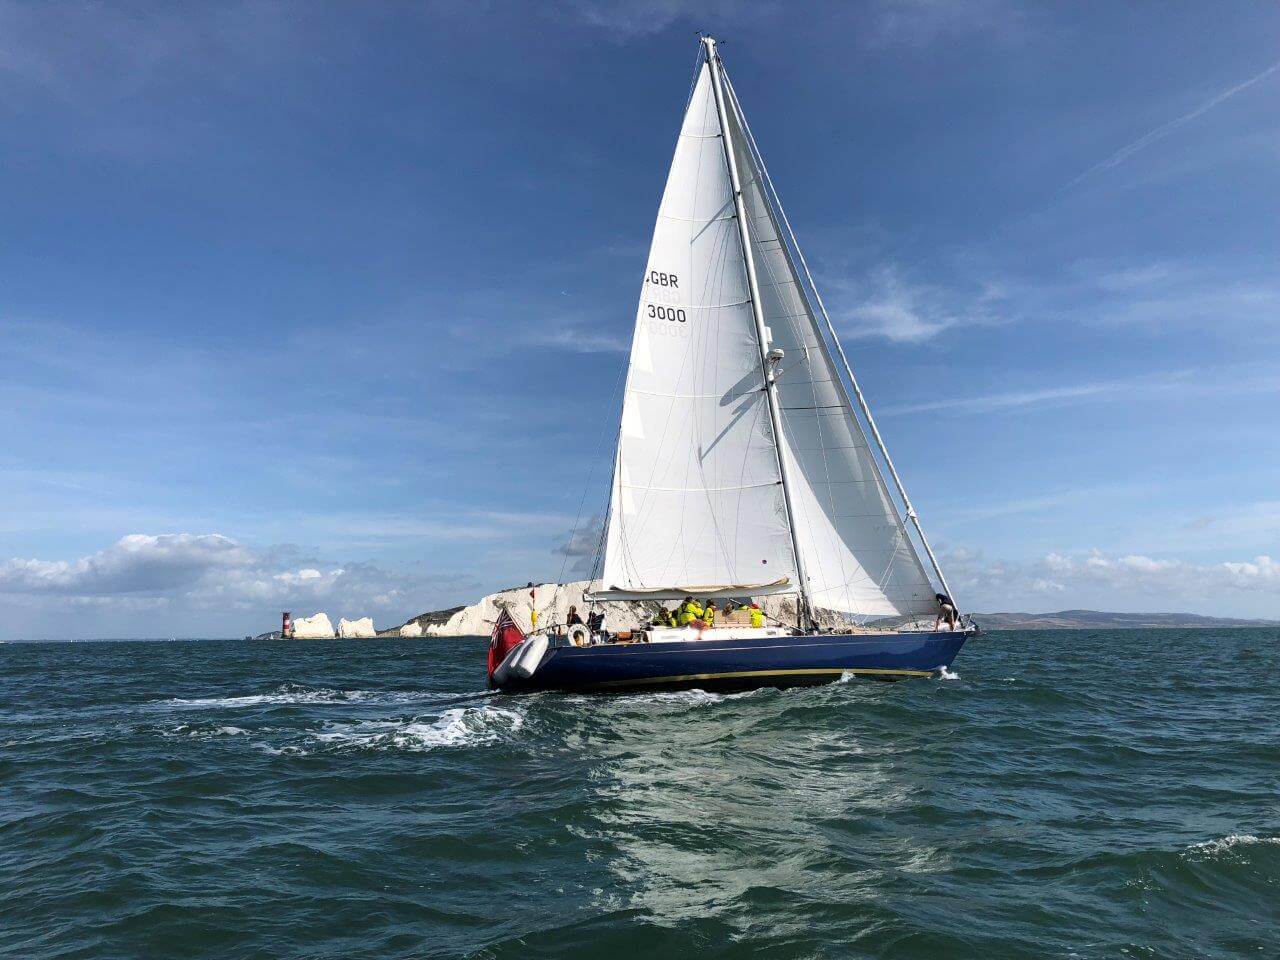 Sailing in the Solent